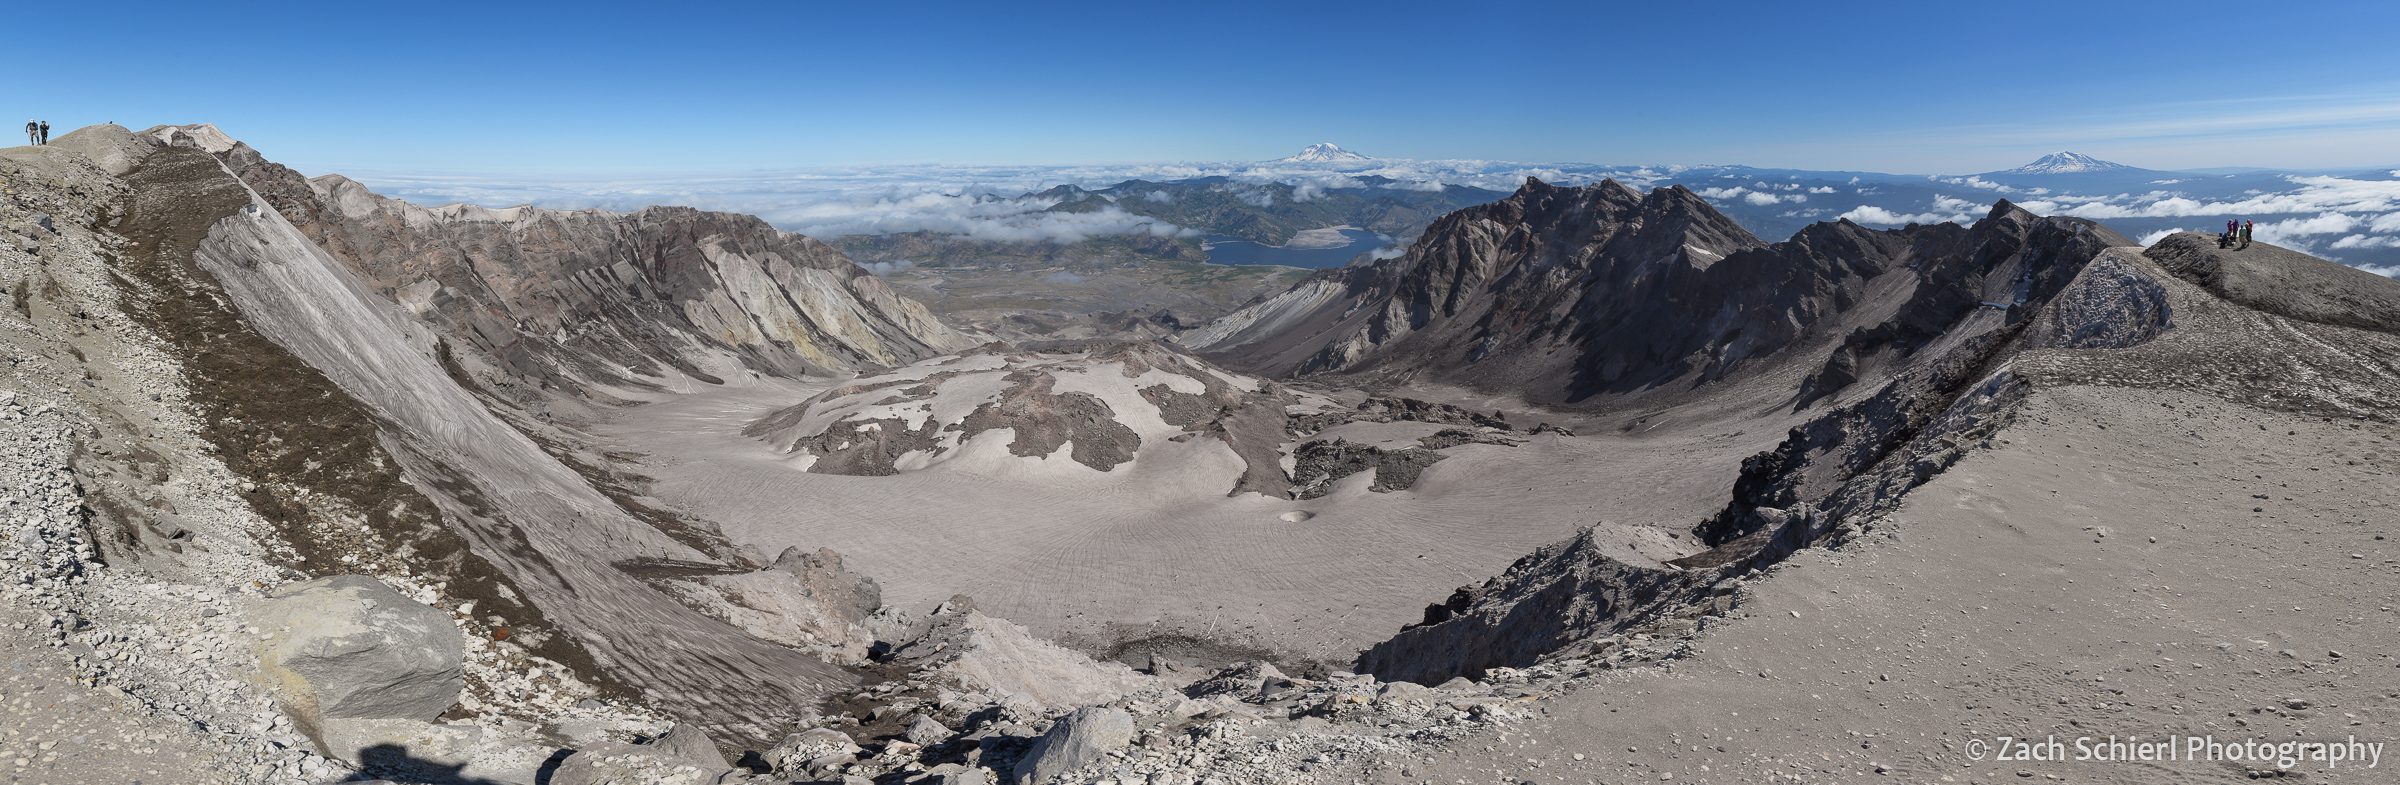 Panorama of a large volcanic crater with a mound of solidified lava in the center